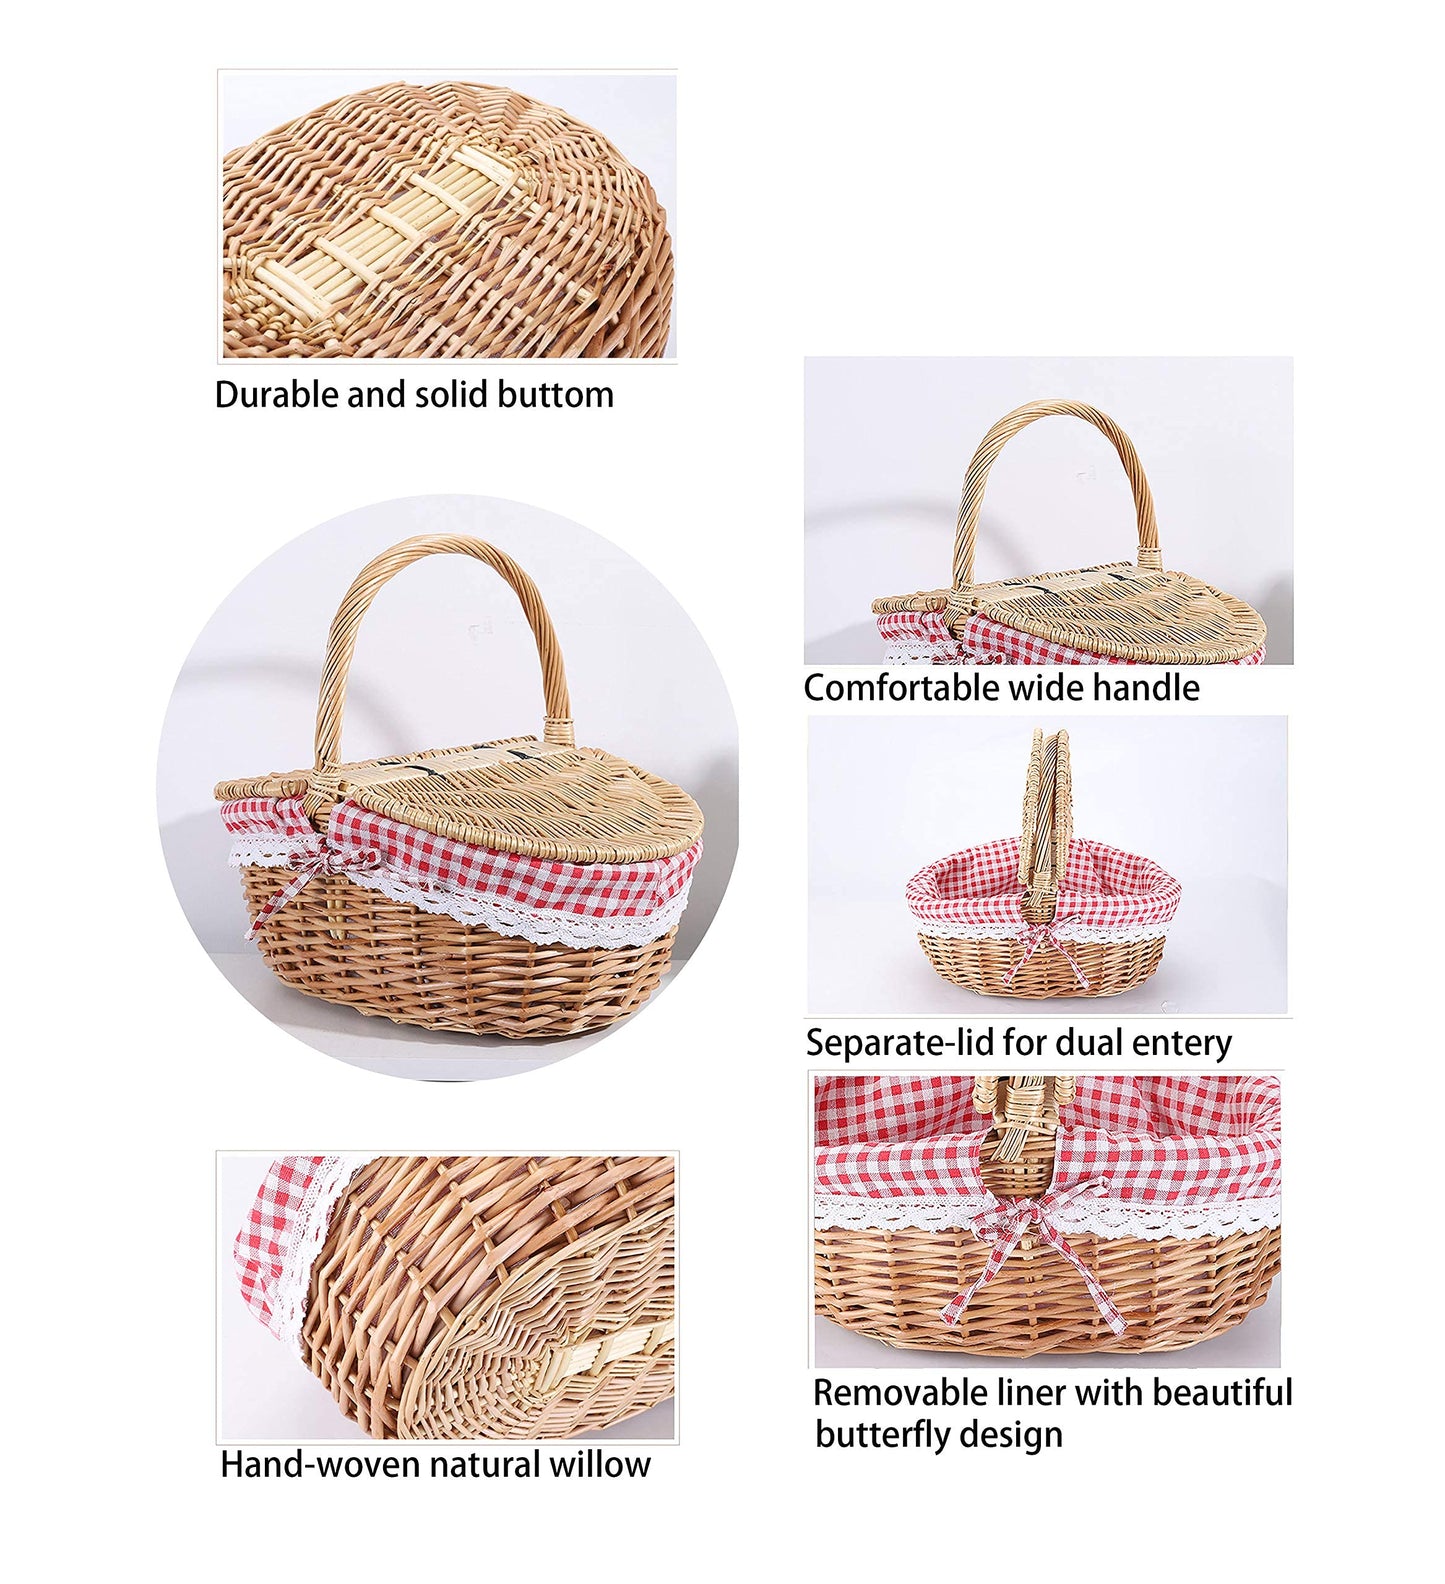 Cedilis Wicker Picnic Basket with Lid and Handle